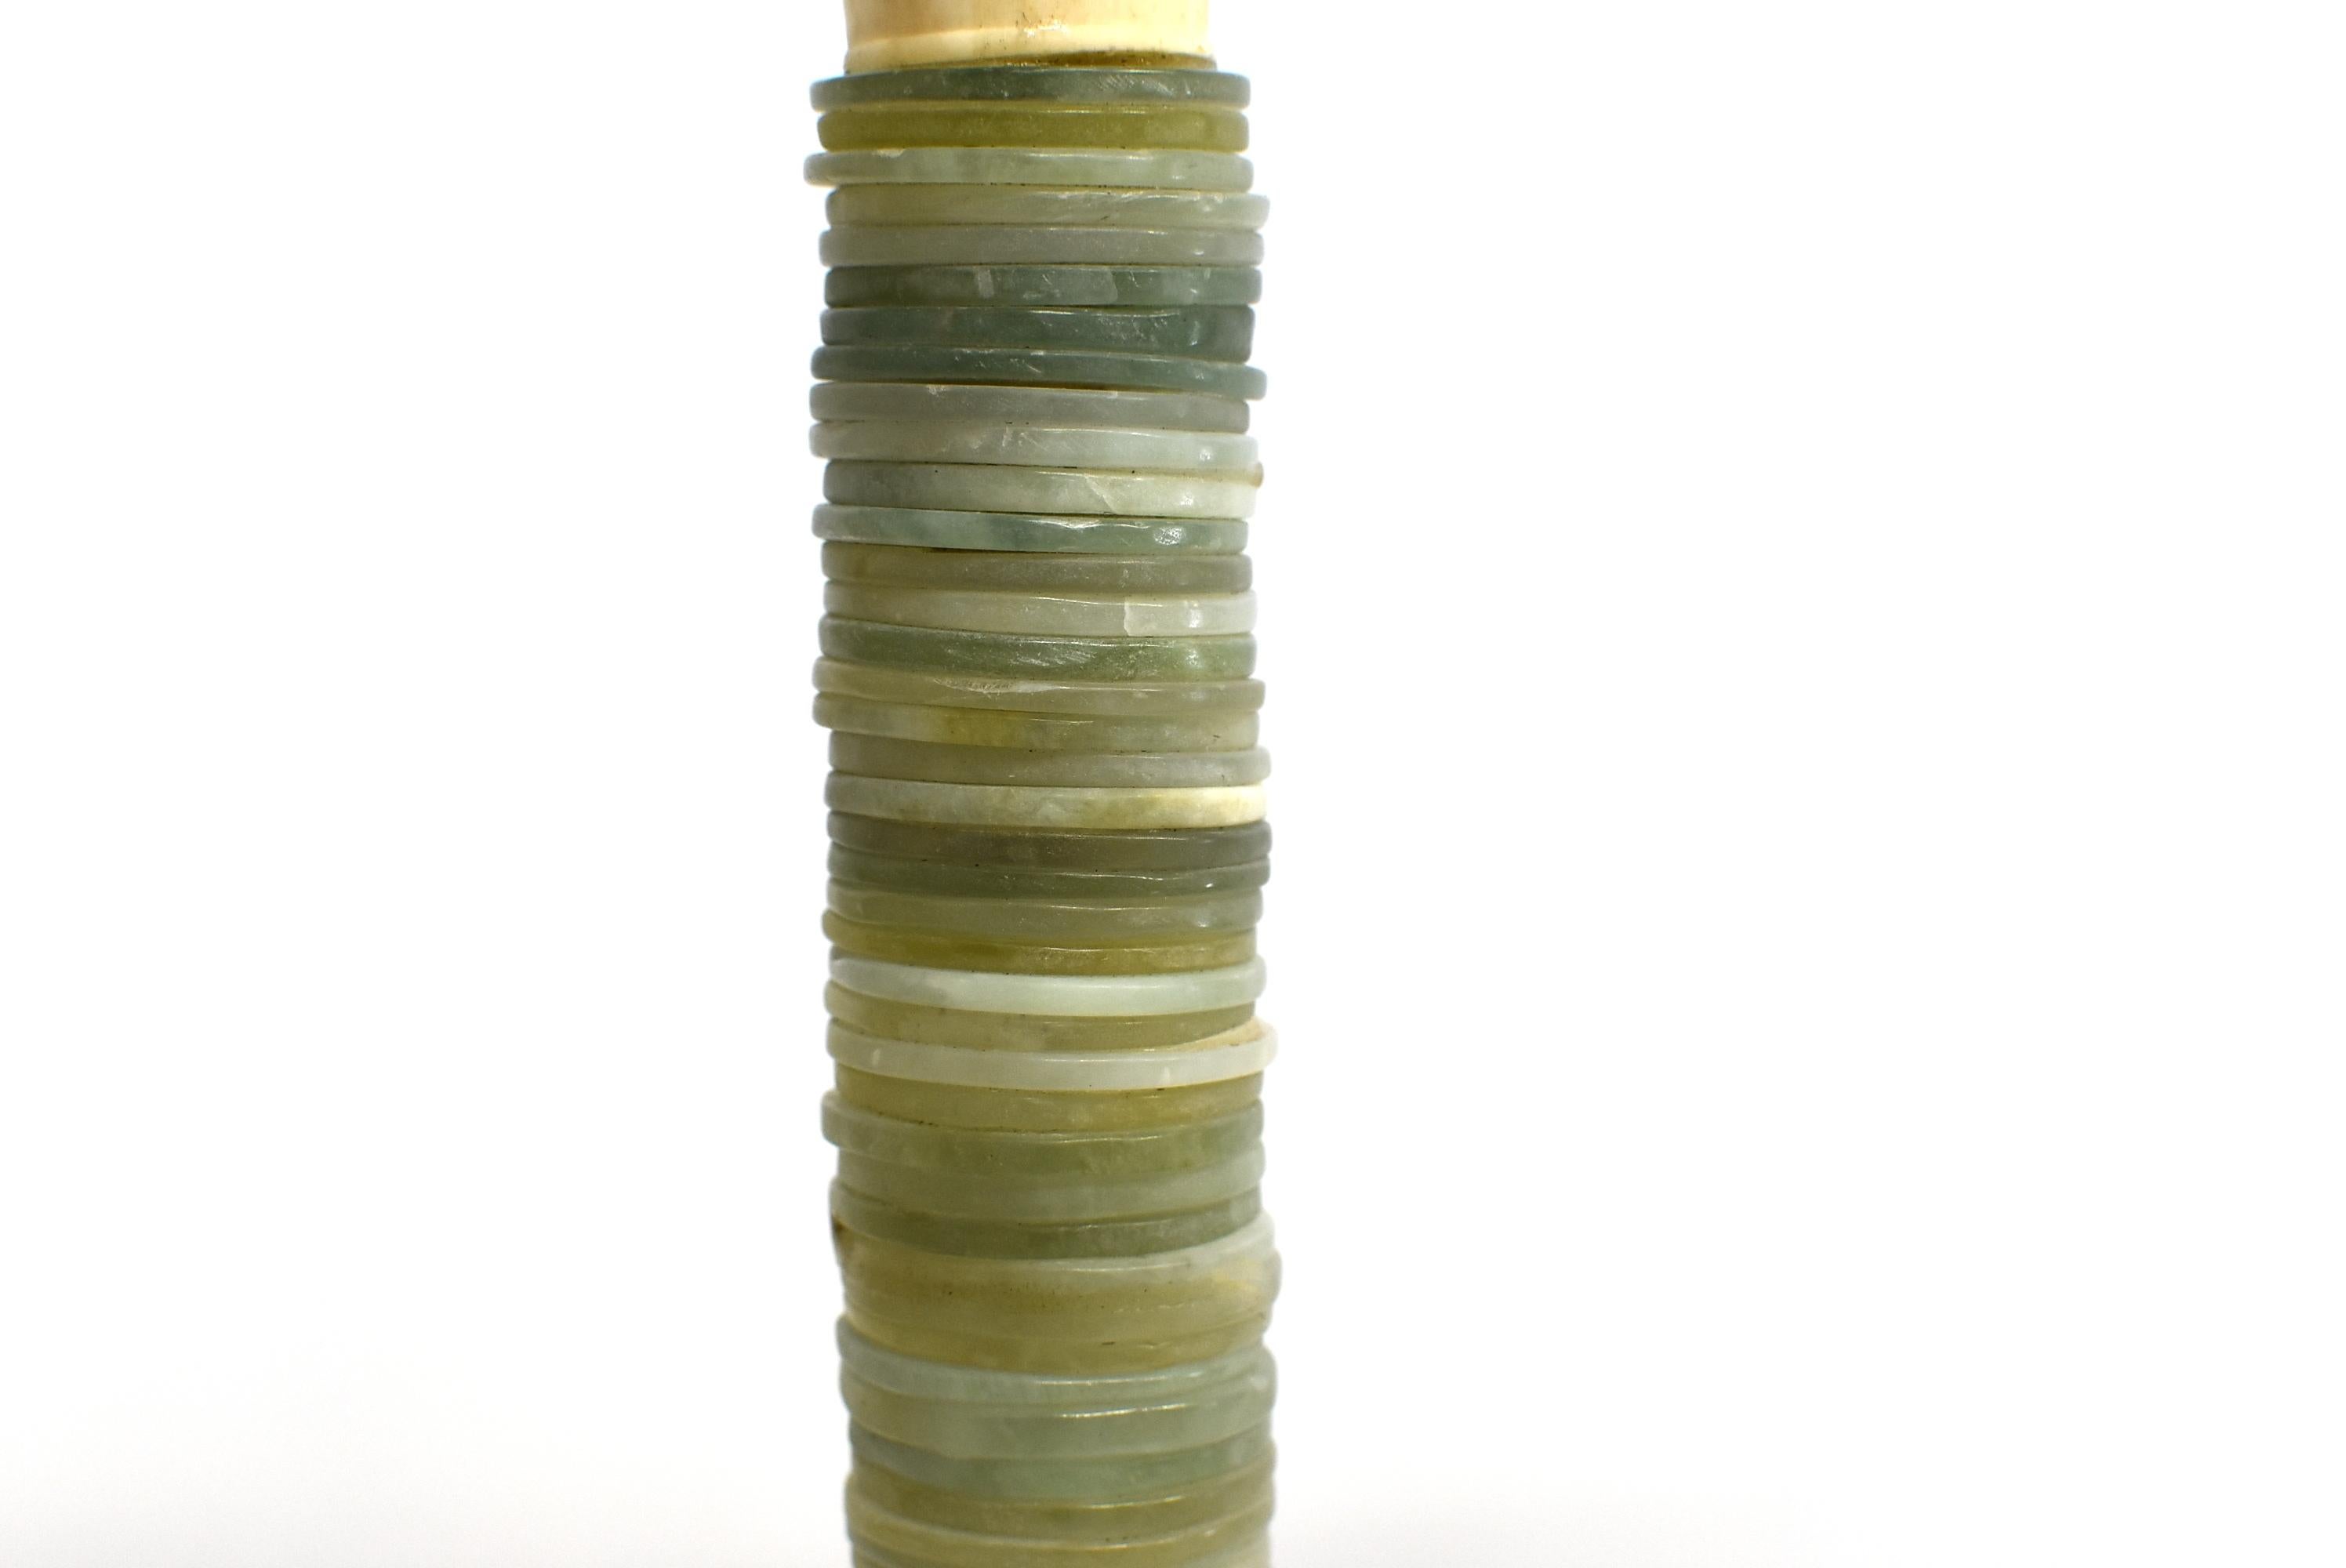 Beautiful large Chinese calligraphy brush with stack of 60 hand carved jade disks. This is an oversize brush displaying a great collection of jade of various color and origin. A very special piece that is at once functional as a painting or